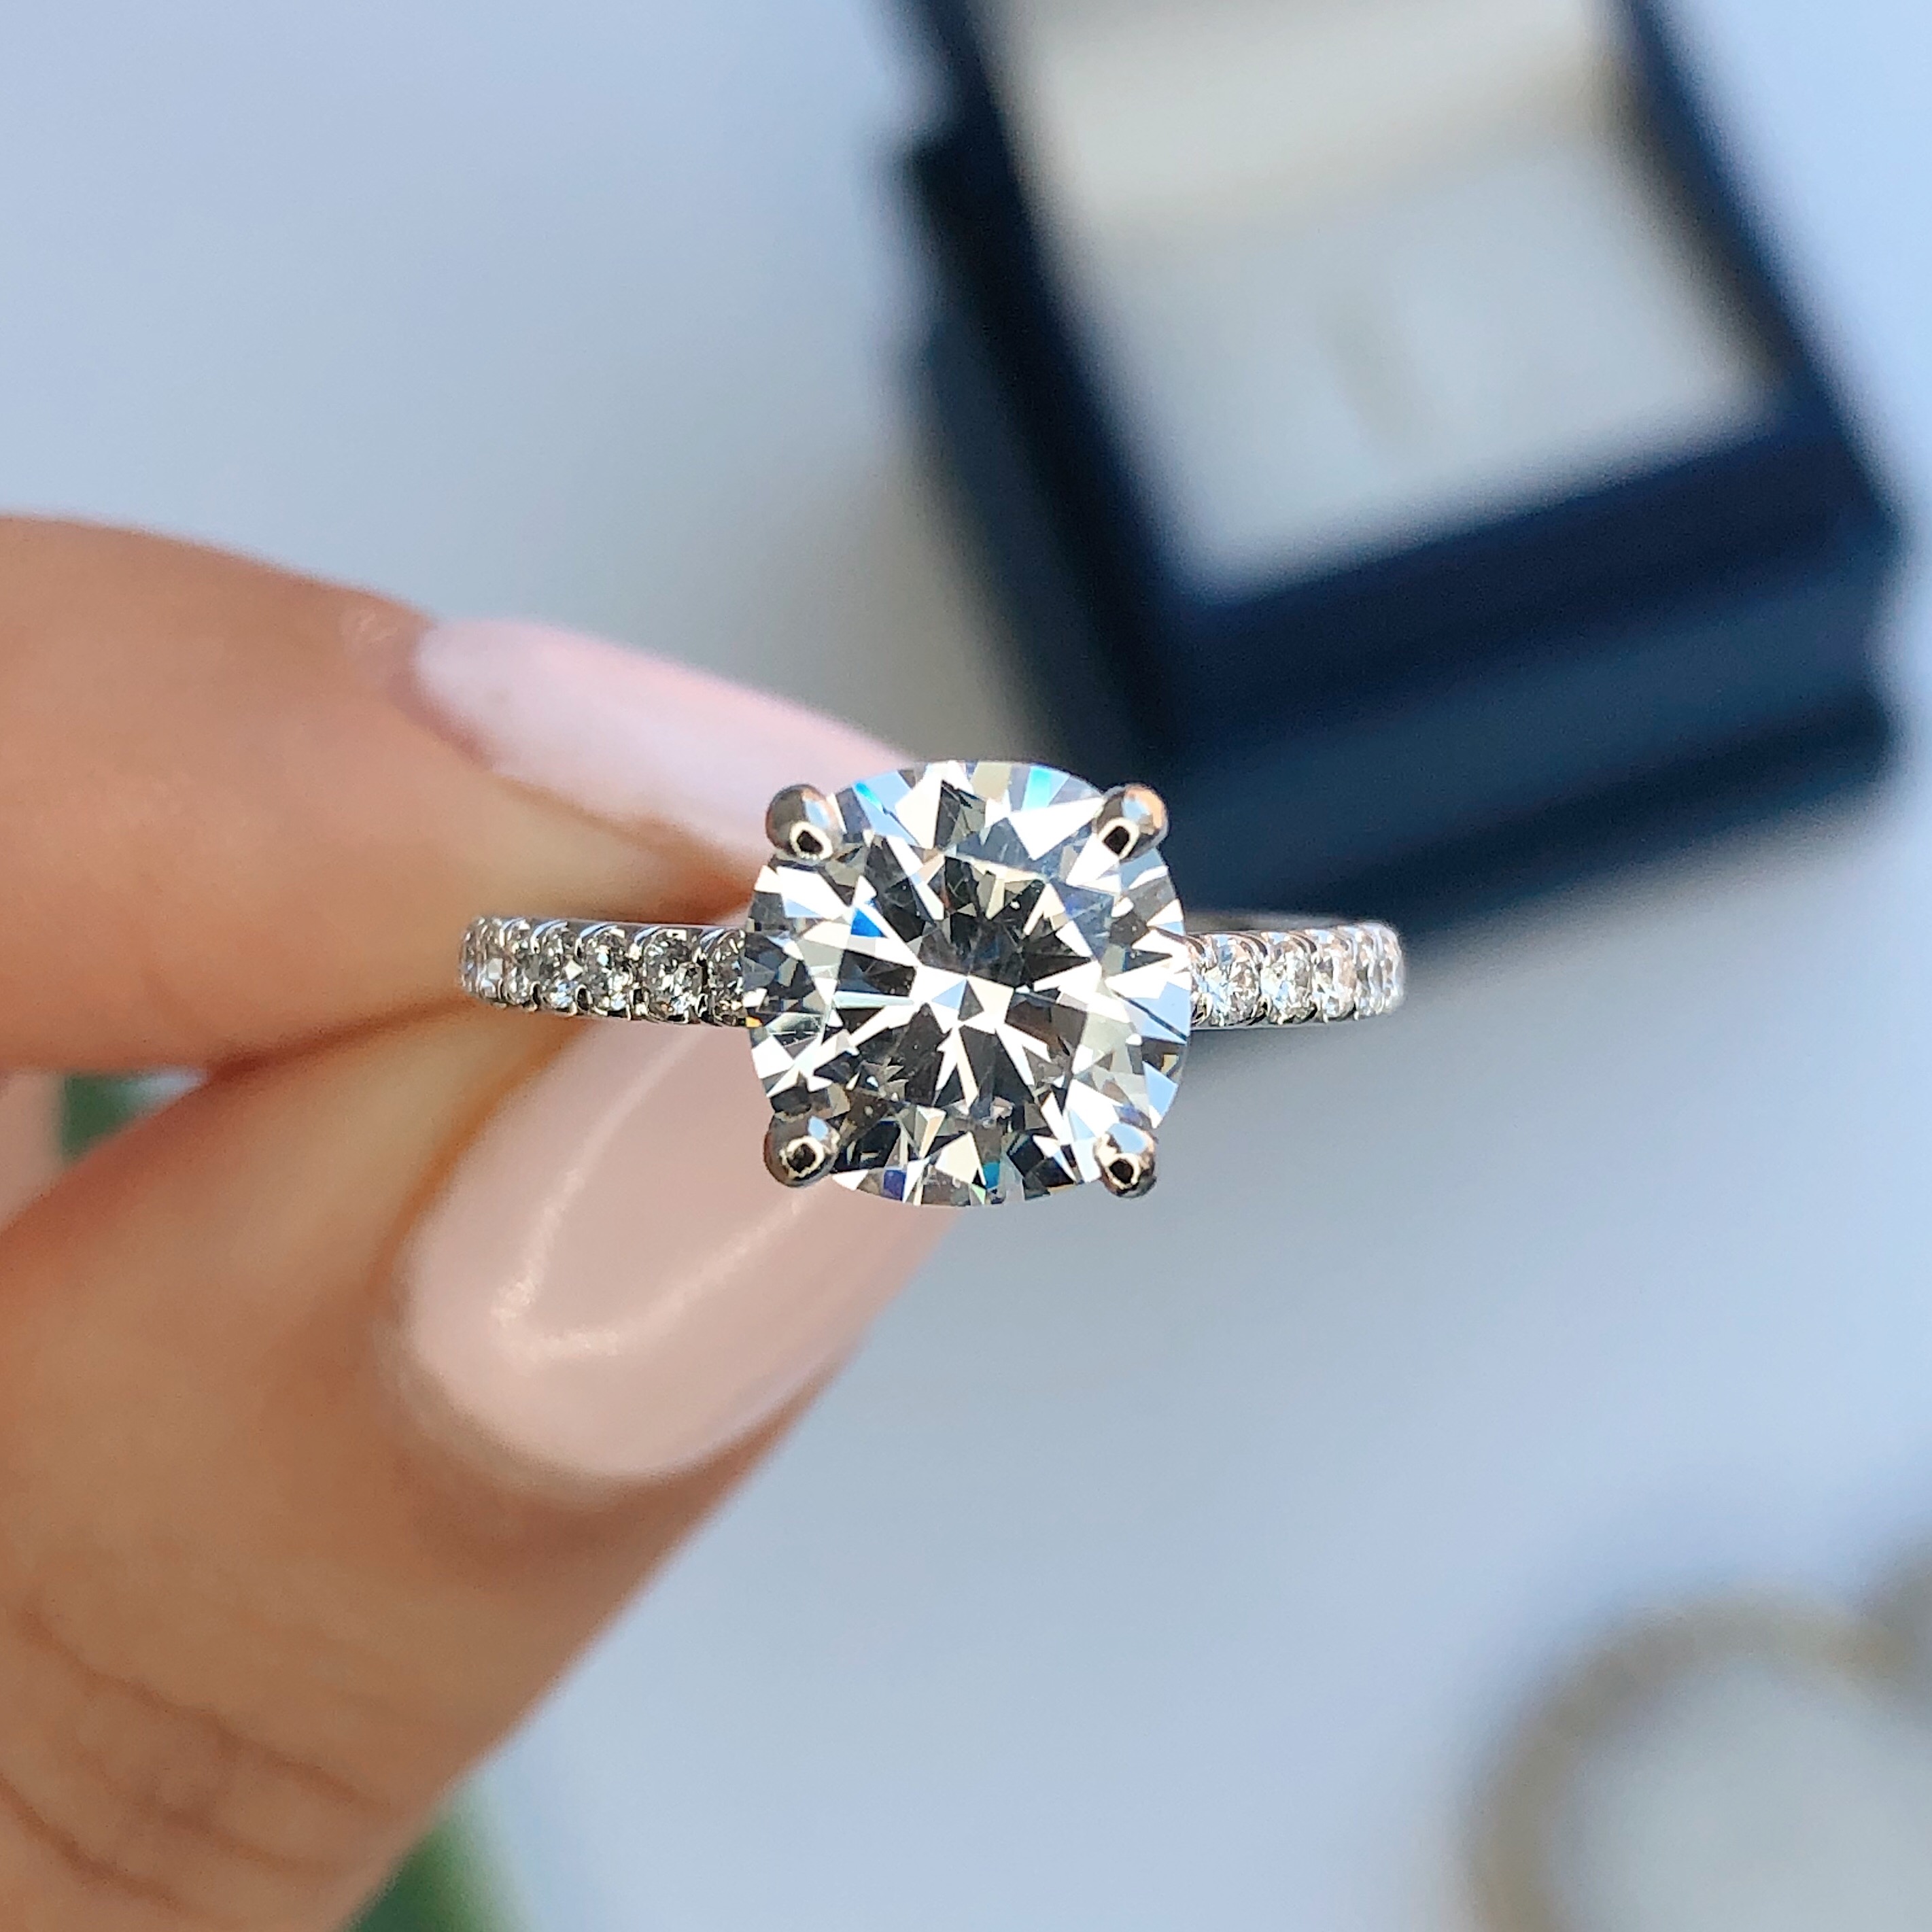 Most Popular Diamond Shapes Icing On The Ring